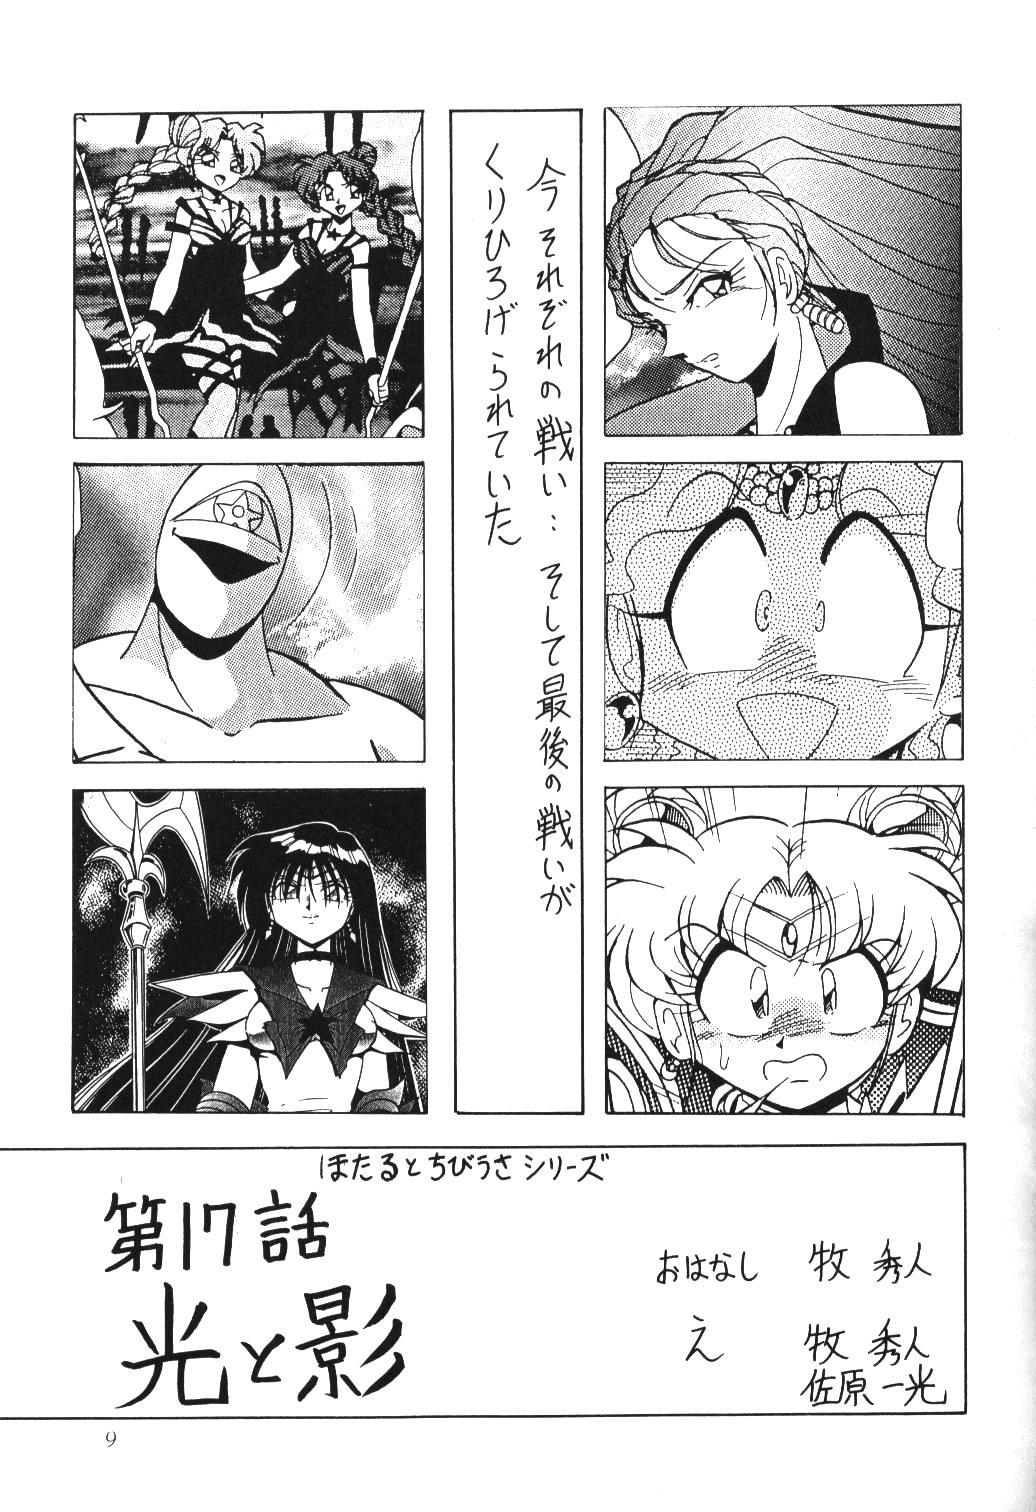 Oral Sex Porn Silent Saturn 10 - Sailor moon Hungarian - Page 7